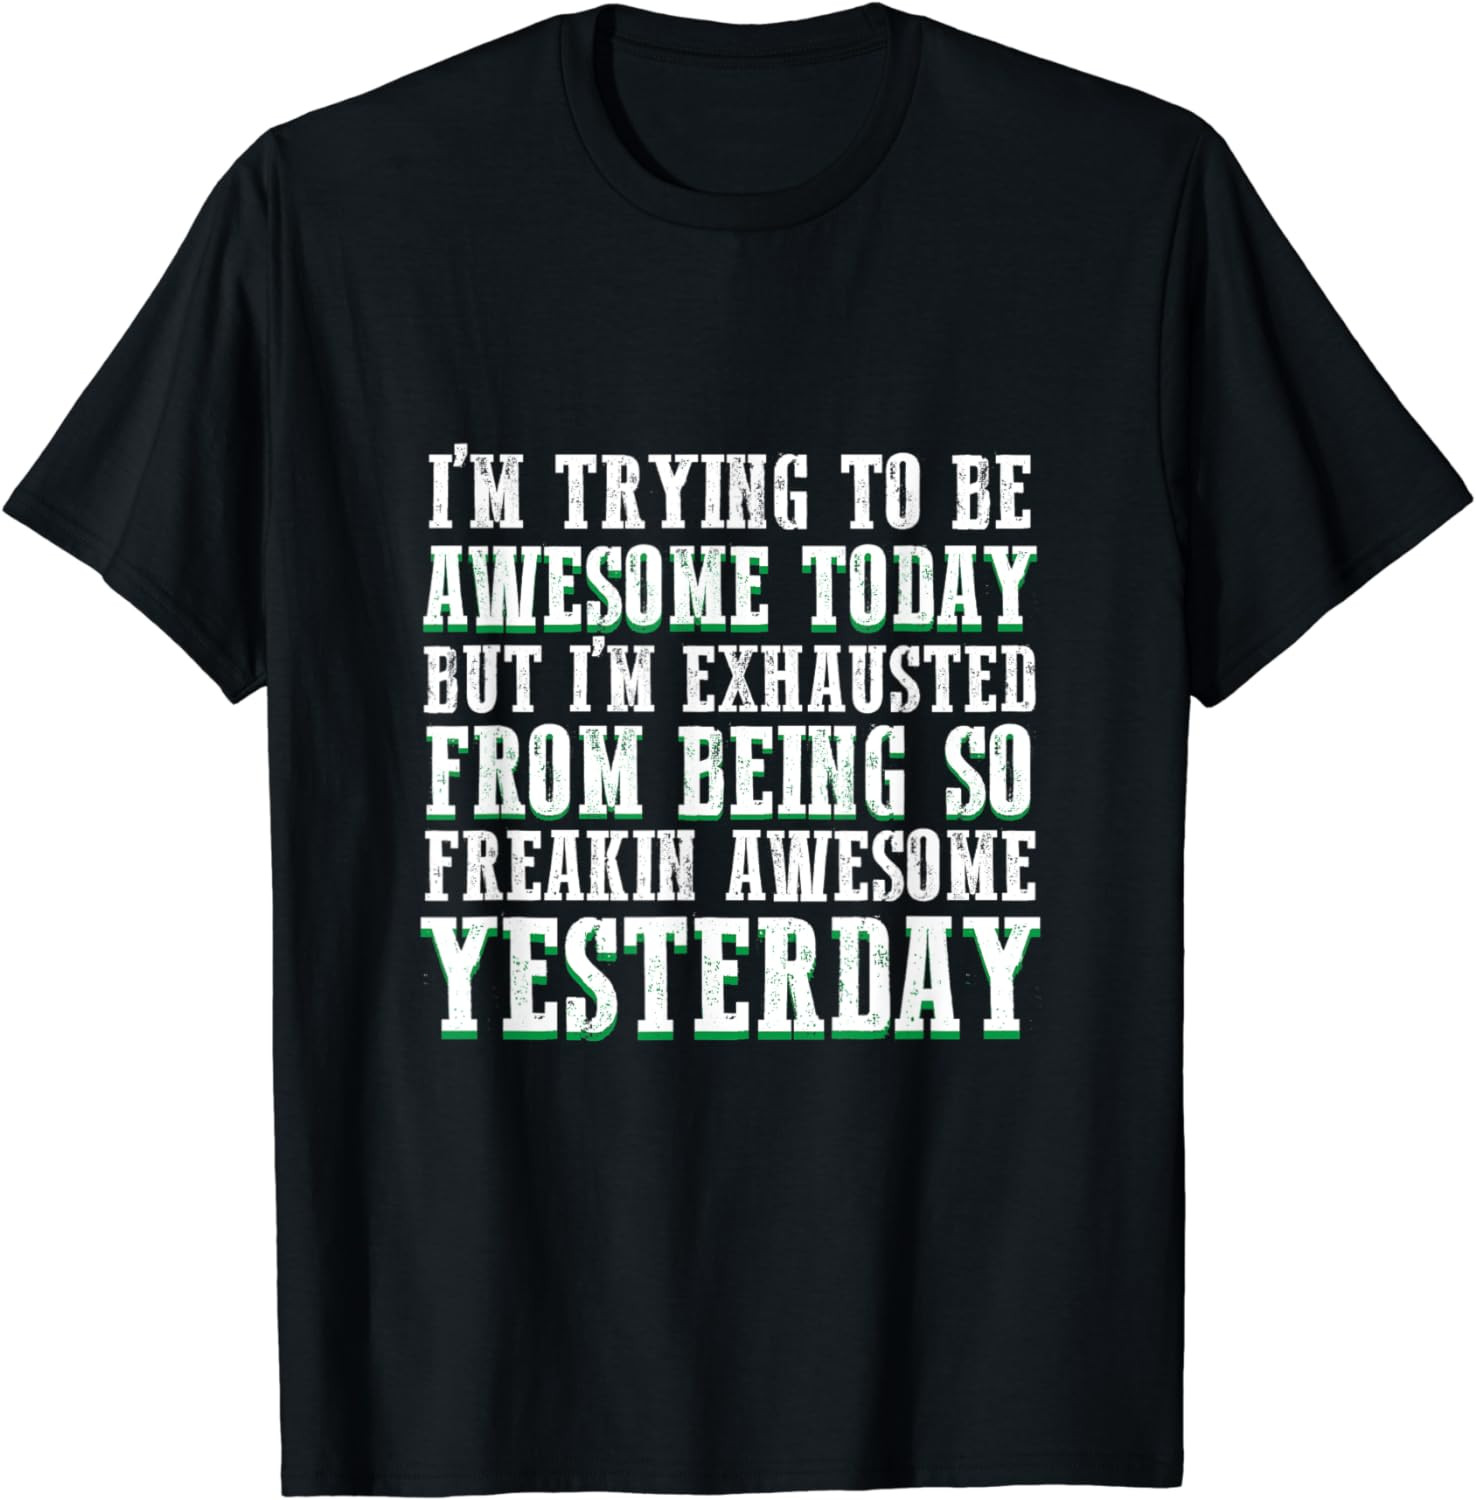 Trying To Be Awesome Today, But I'm Exhausted From Yesterday T-Shirt